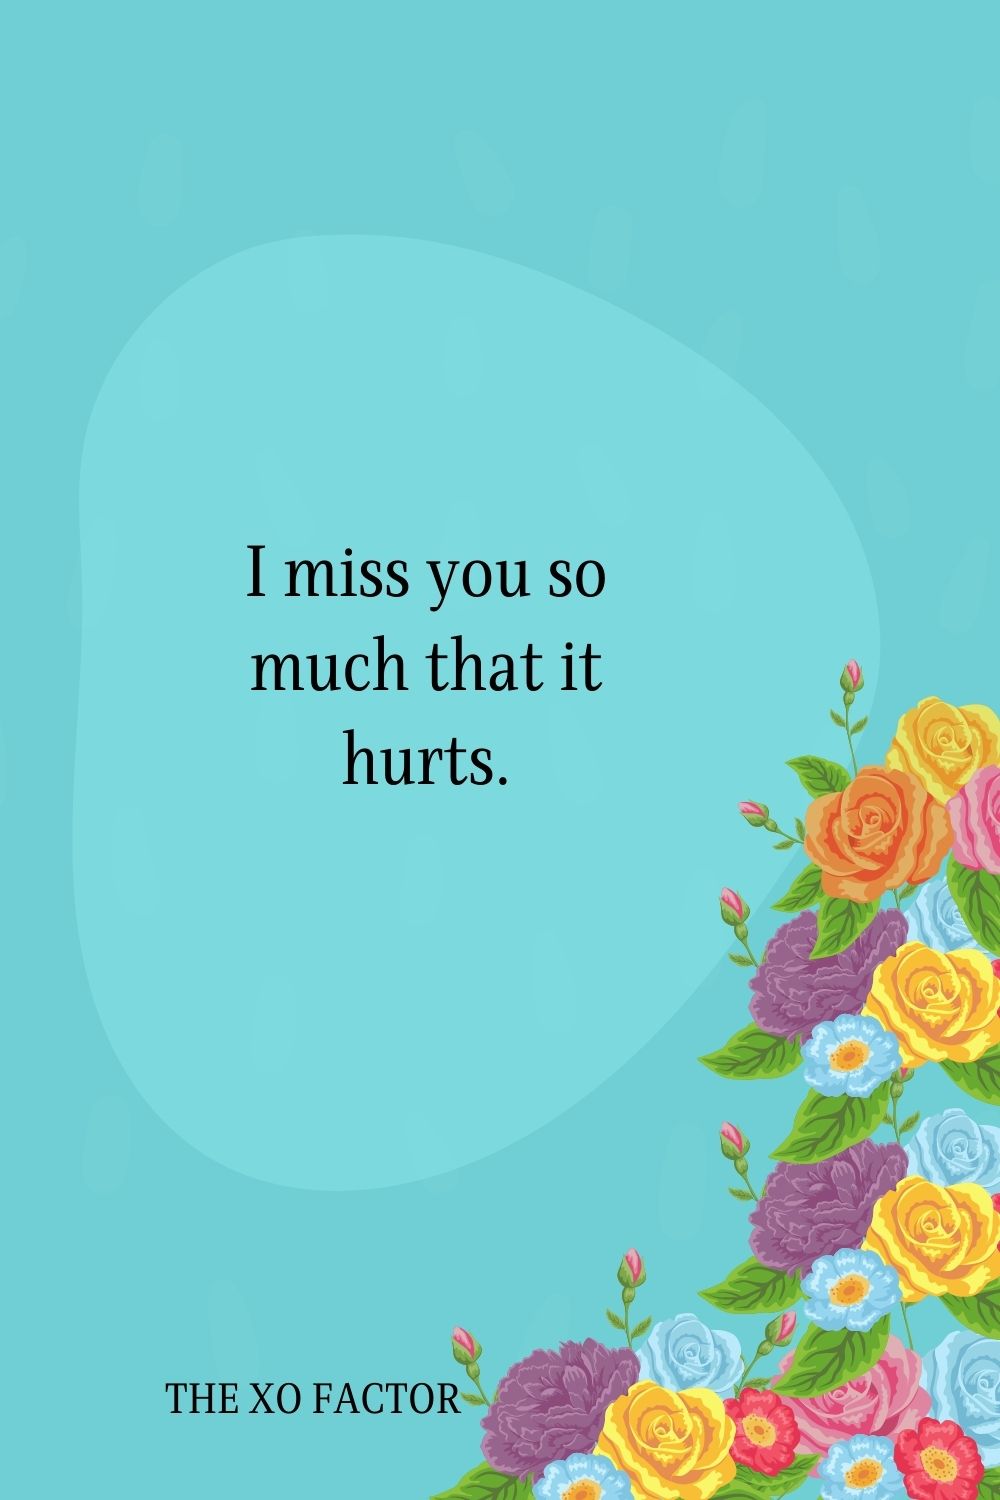 I miss you so much that it hurts.